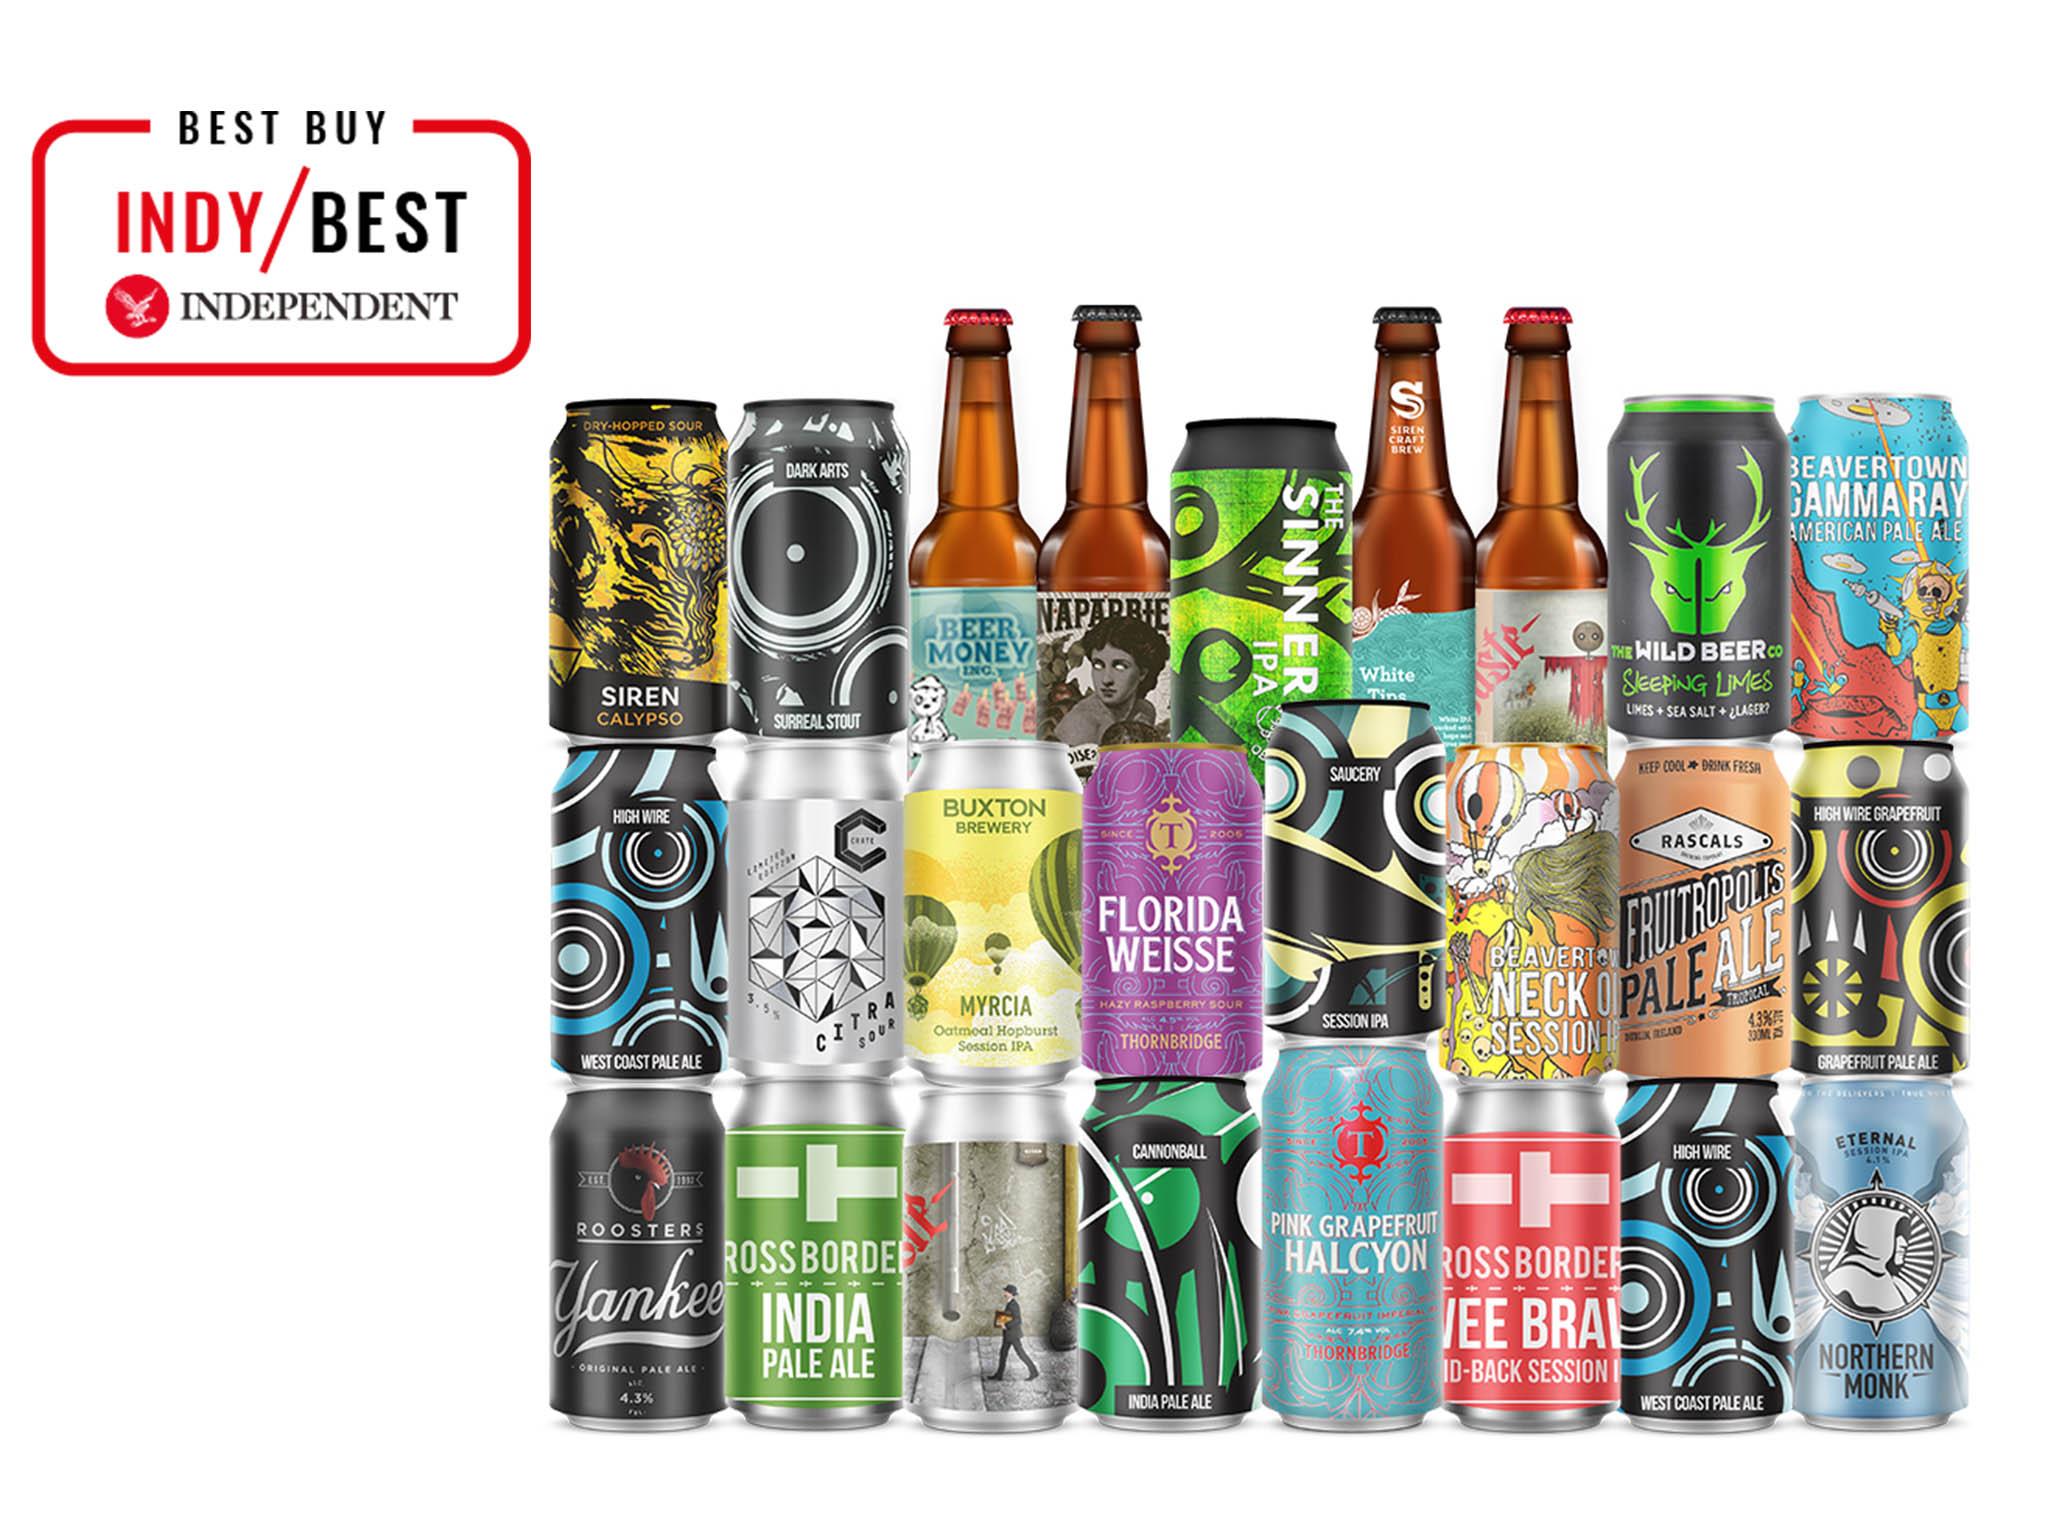 Create your own beer-tasting session with this party box from Honest Brew